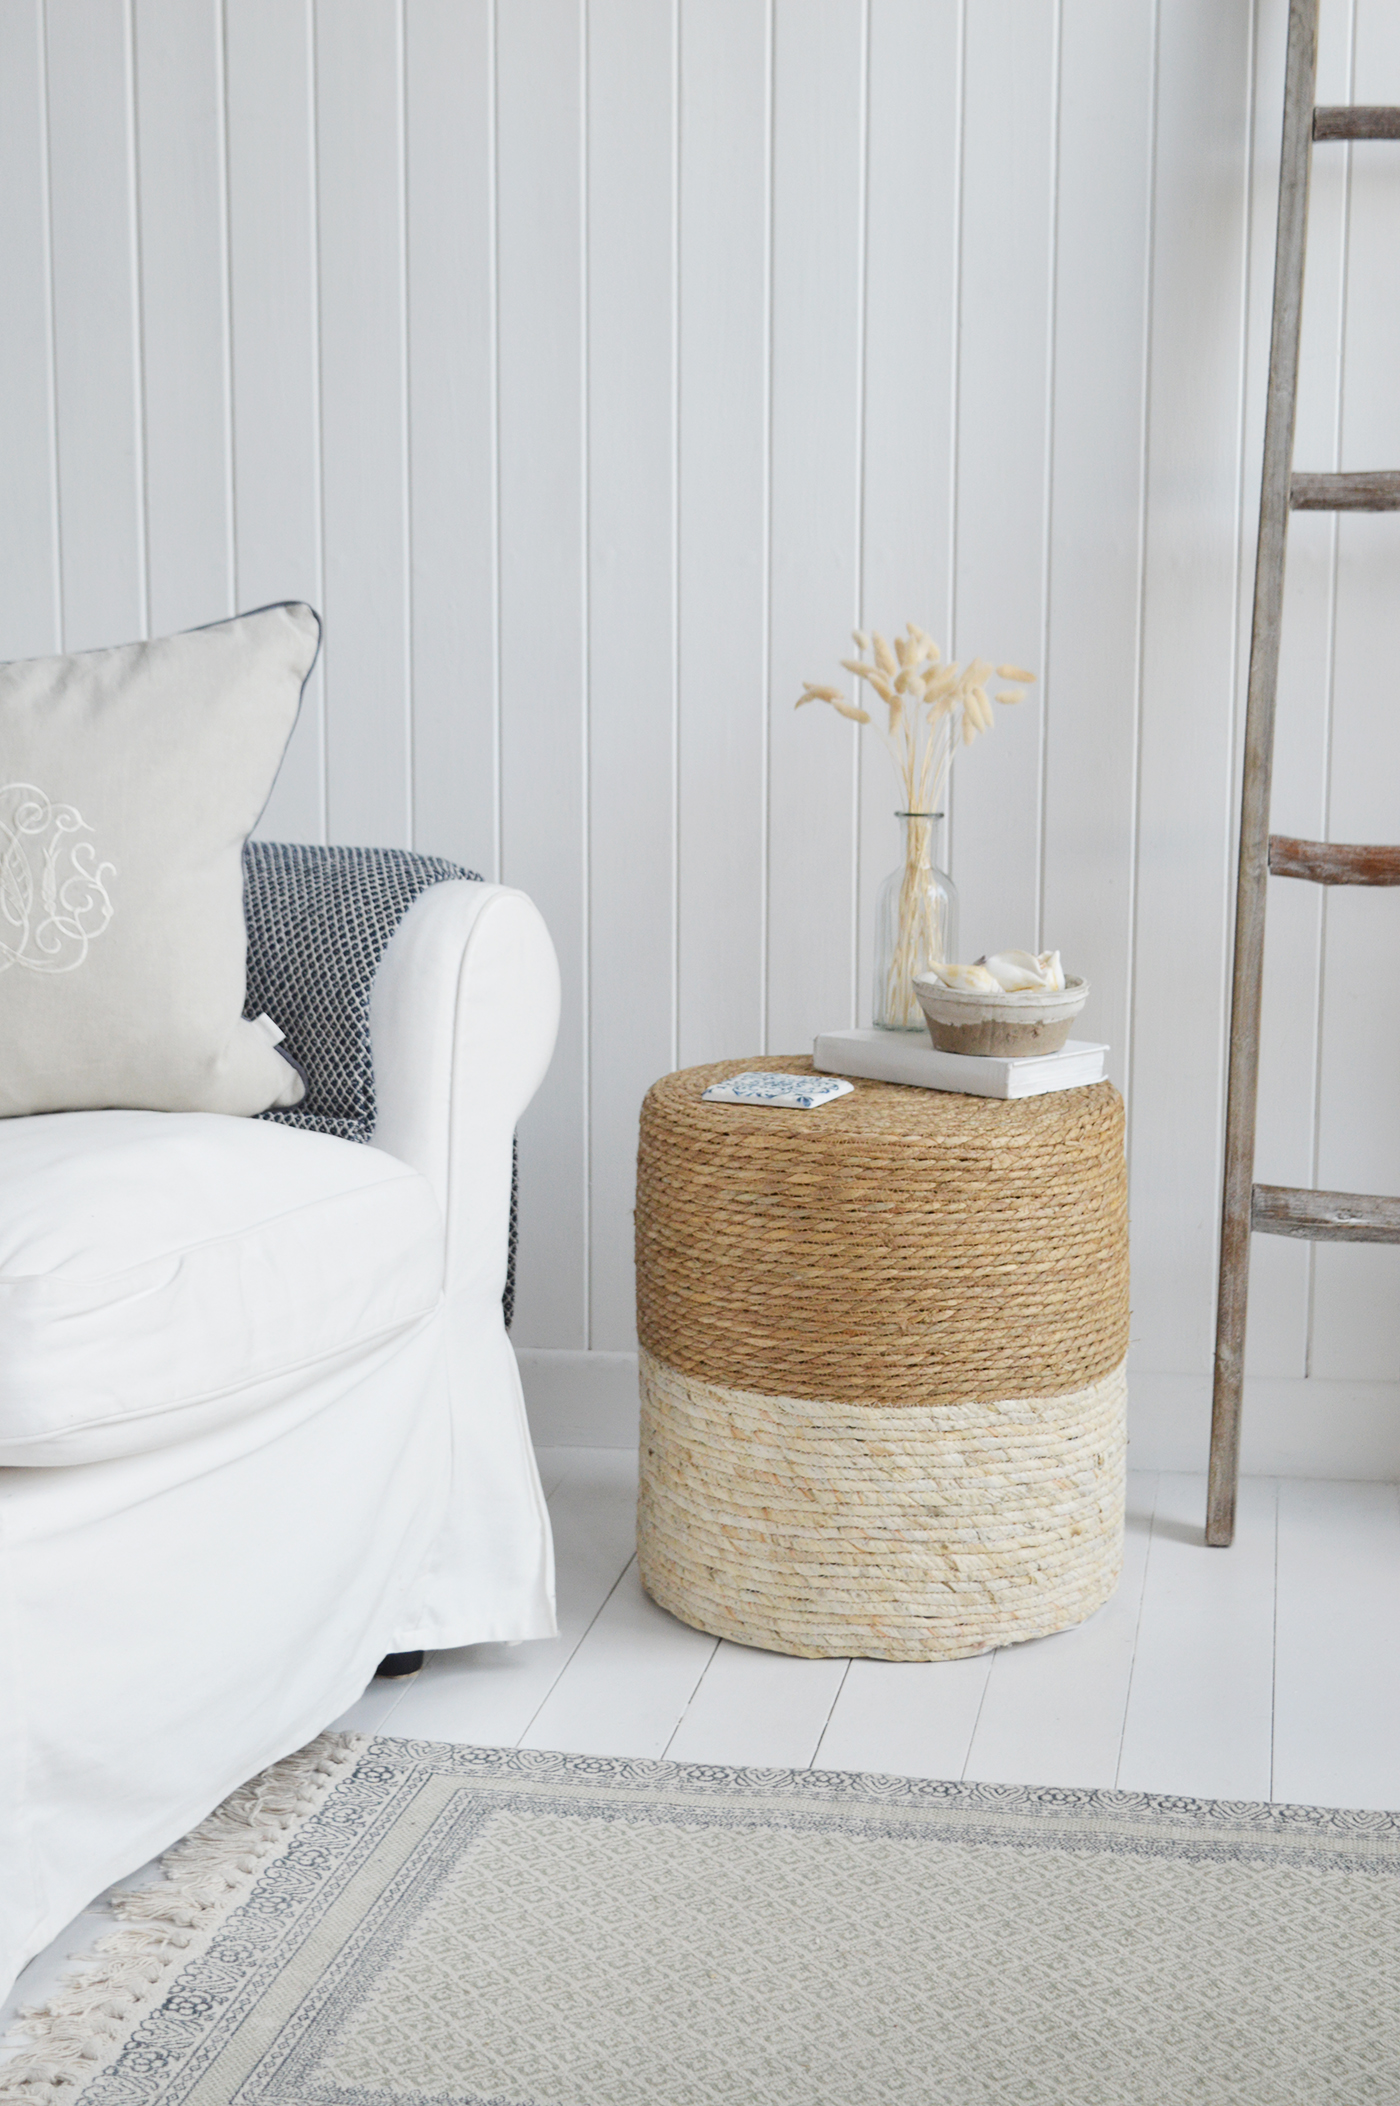 Fall River Stool or side table  - Ideal to add warmth with natural material in a coastal or New England living room interior decor from The White Lighthouse Furniture. Bathroom, Living Room, Bedroom and Hallway Furniture for beautiful homes